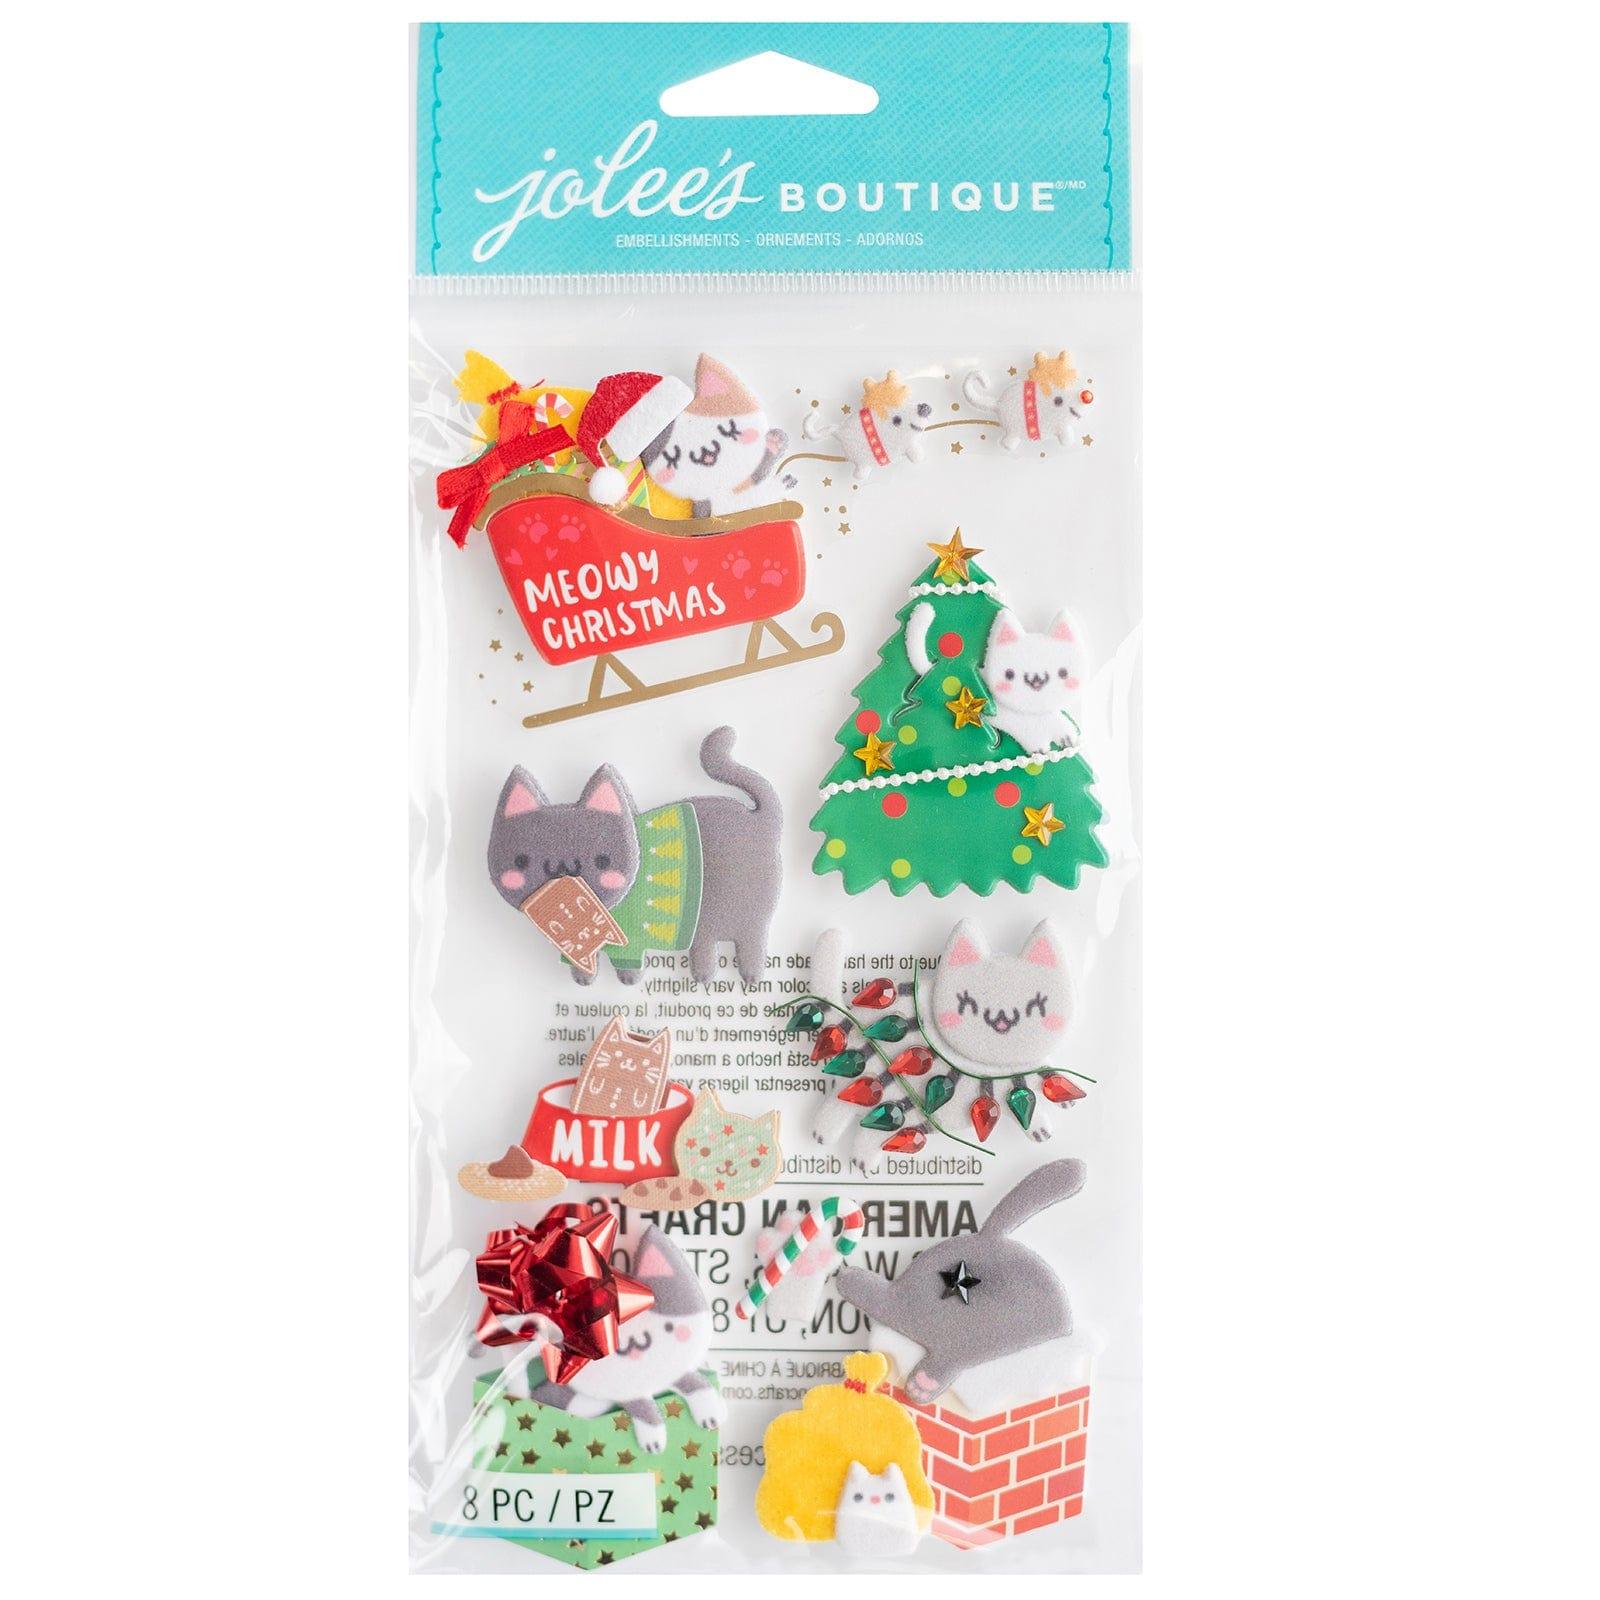 Holiday Collection Meowy Christmas 4 x 7 Scrapbook Embellishment by Jolee's Boutique - Scrapbook Supply Companies